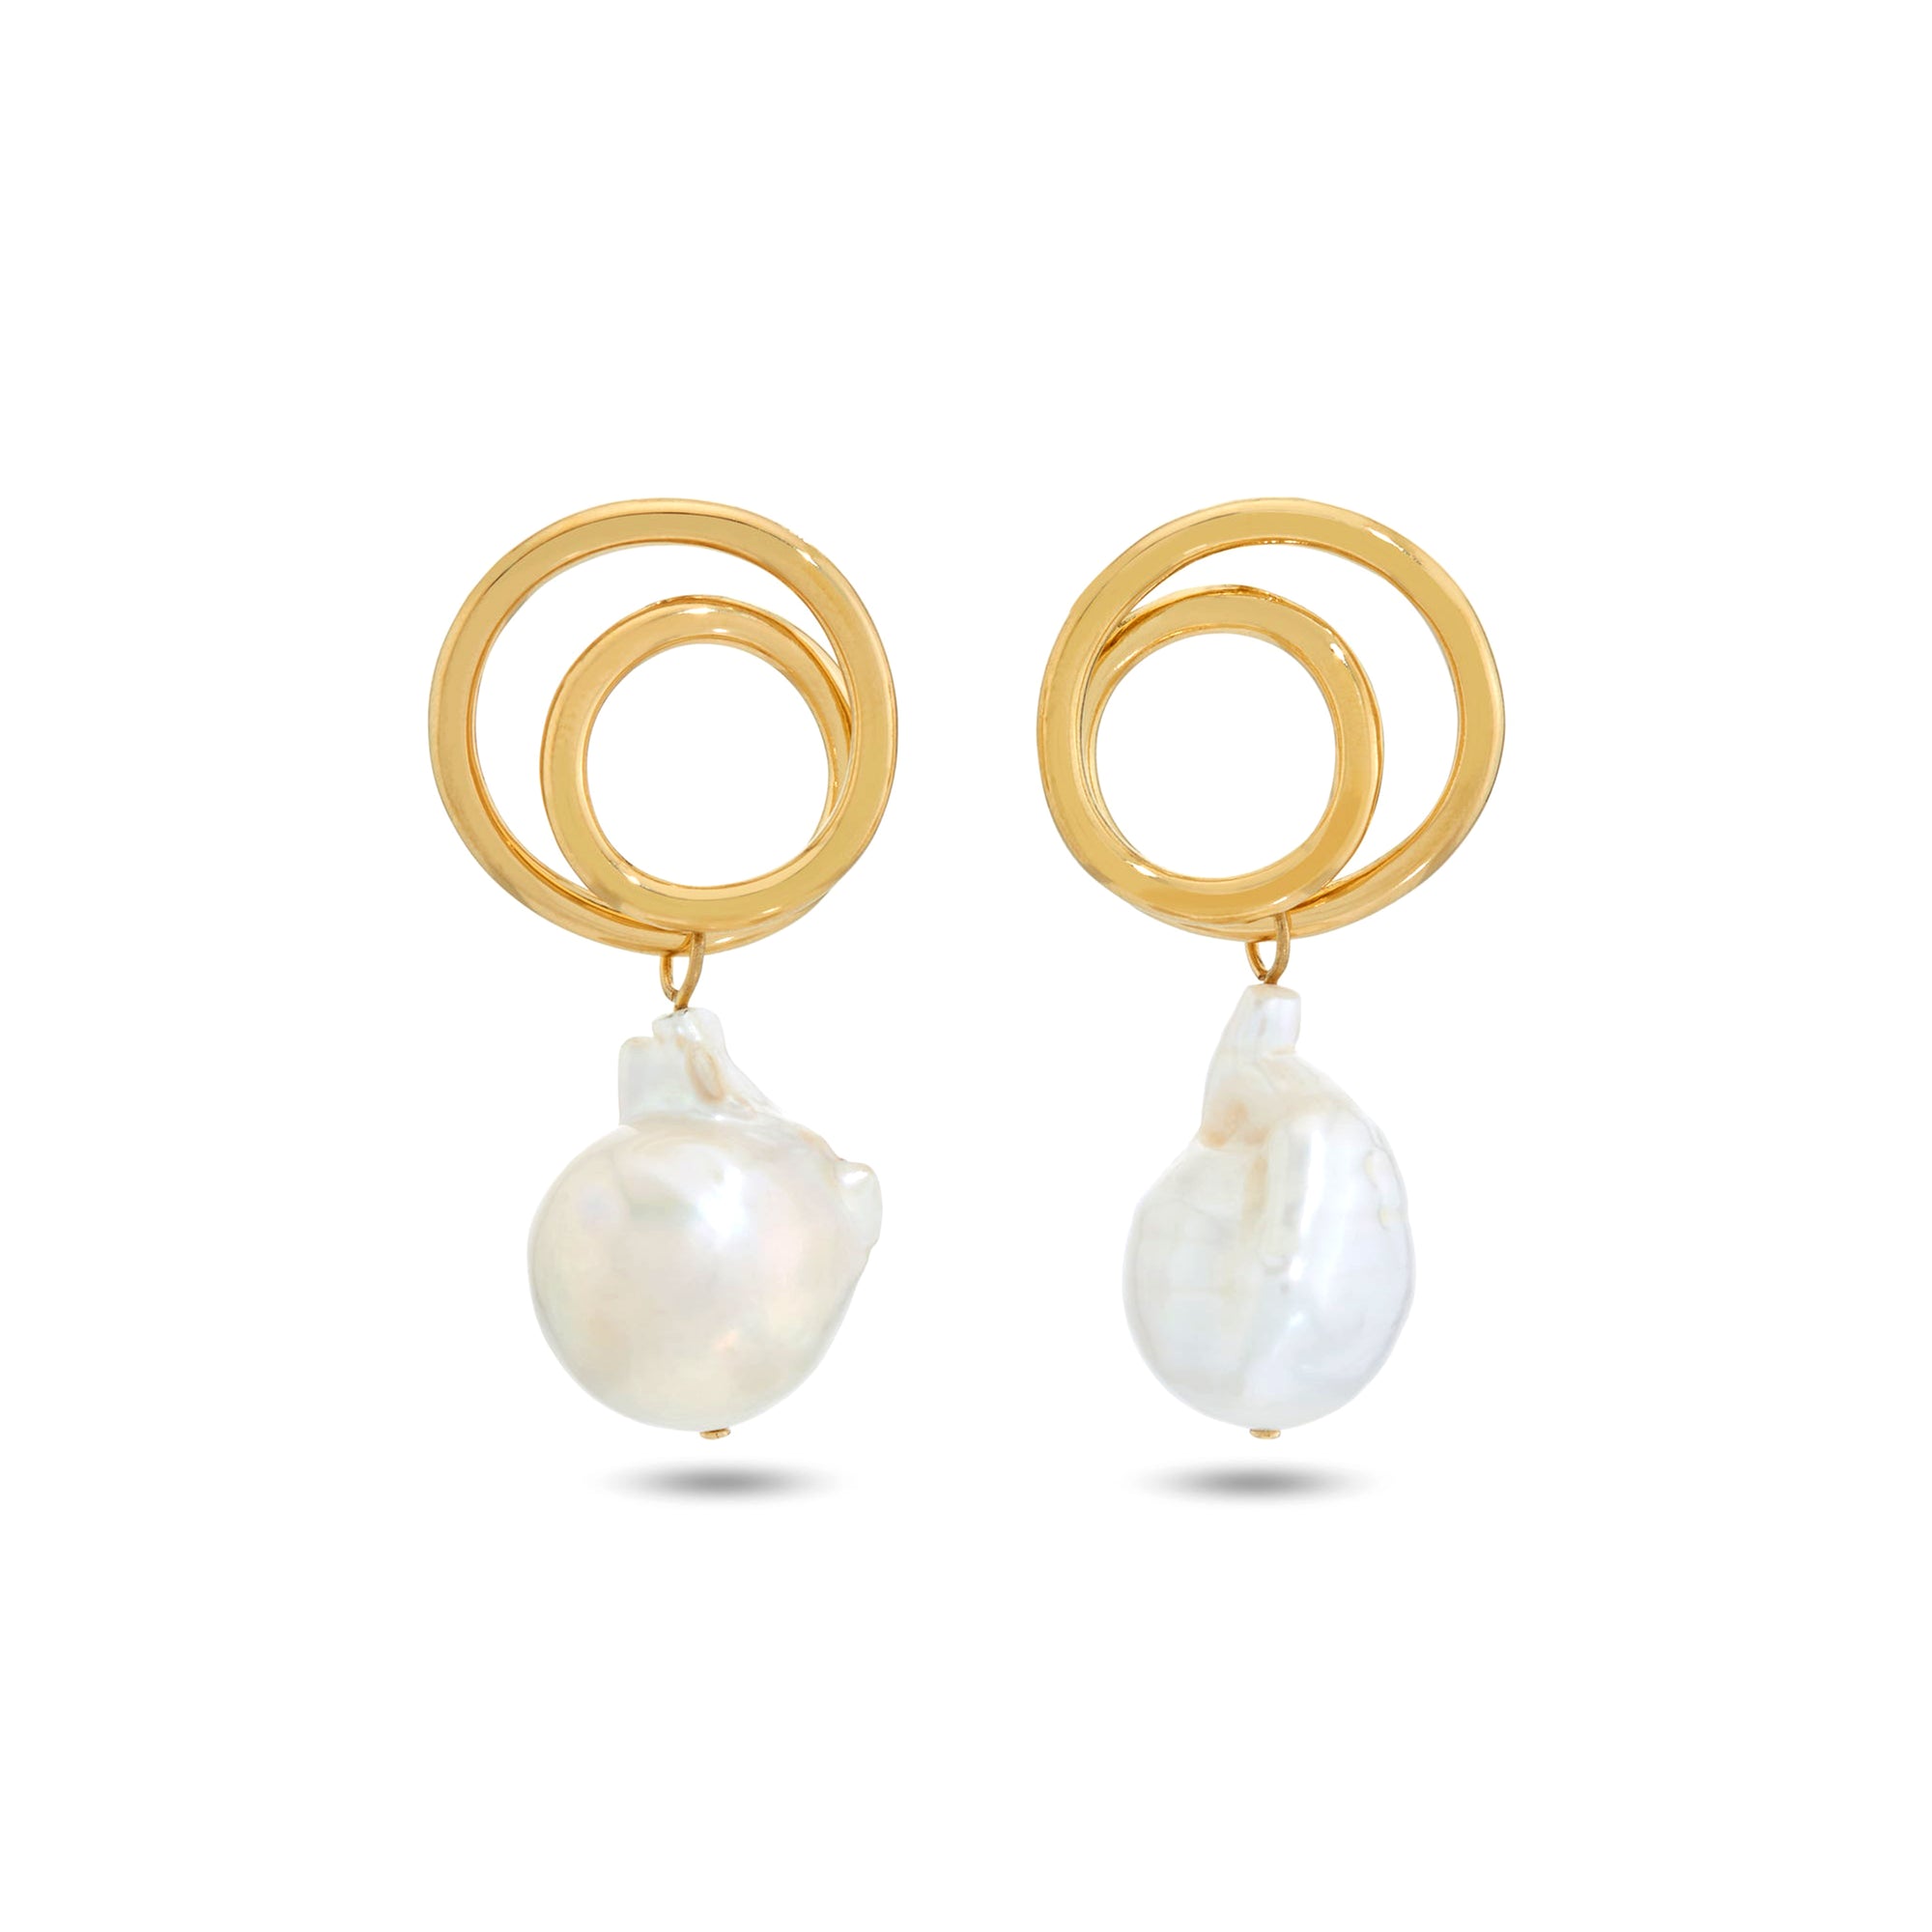 Completedworks - Spiral Earrings with Fresh Water Pearls view 1